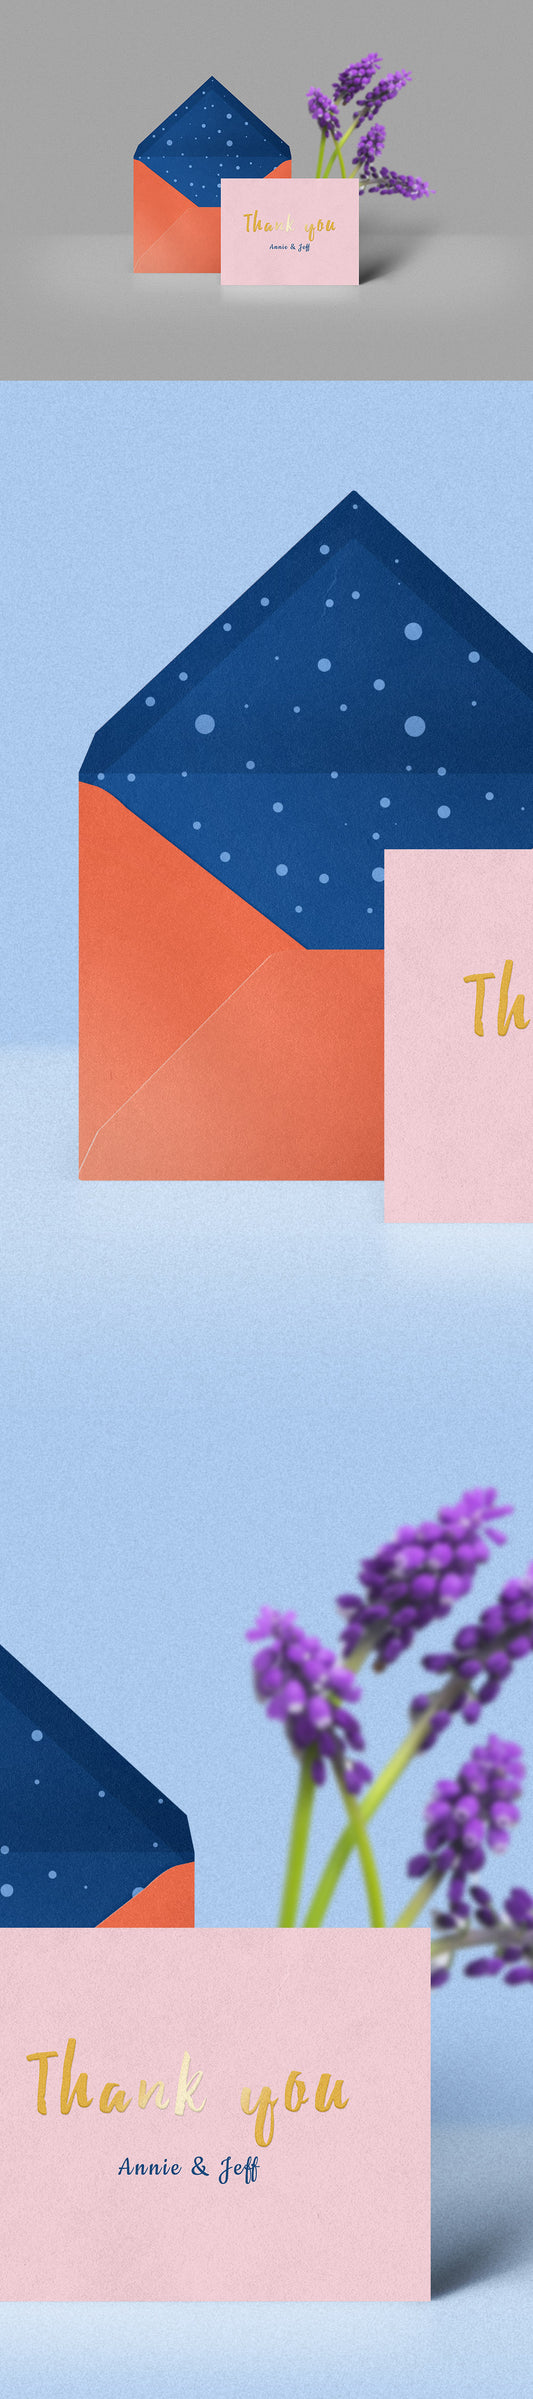 Free Thank You Card and Envelope Mockup